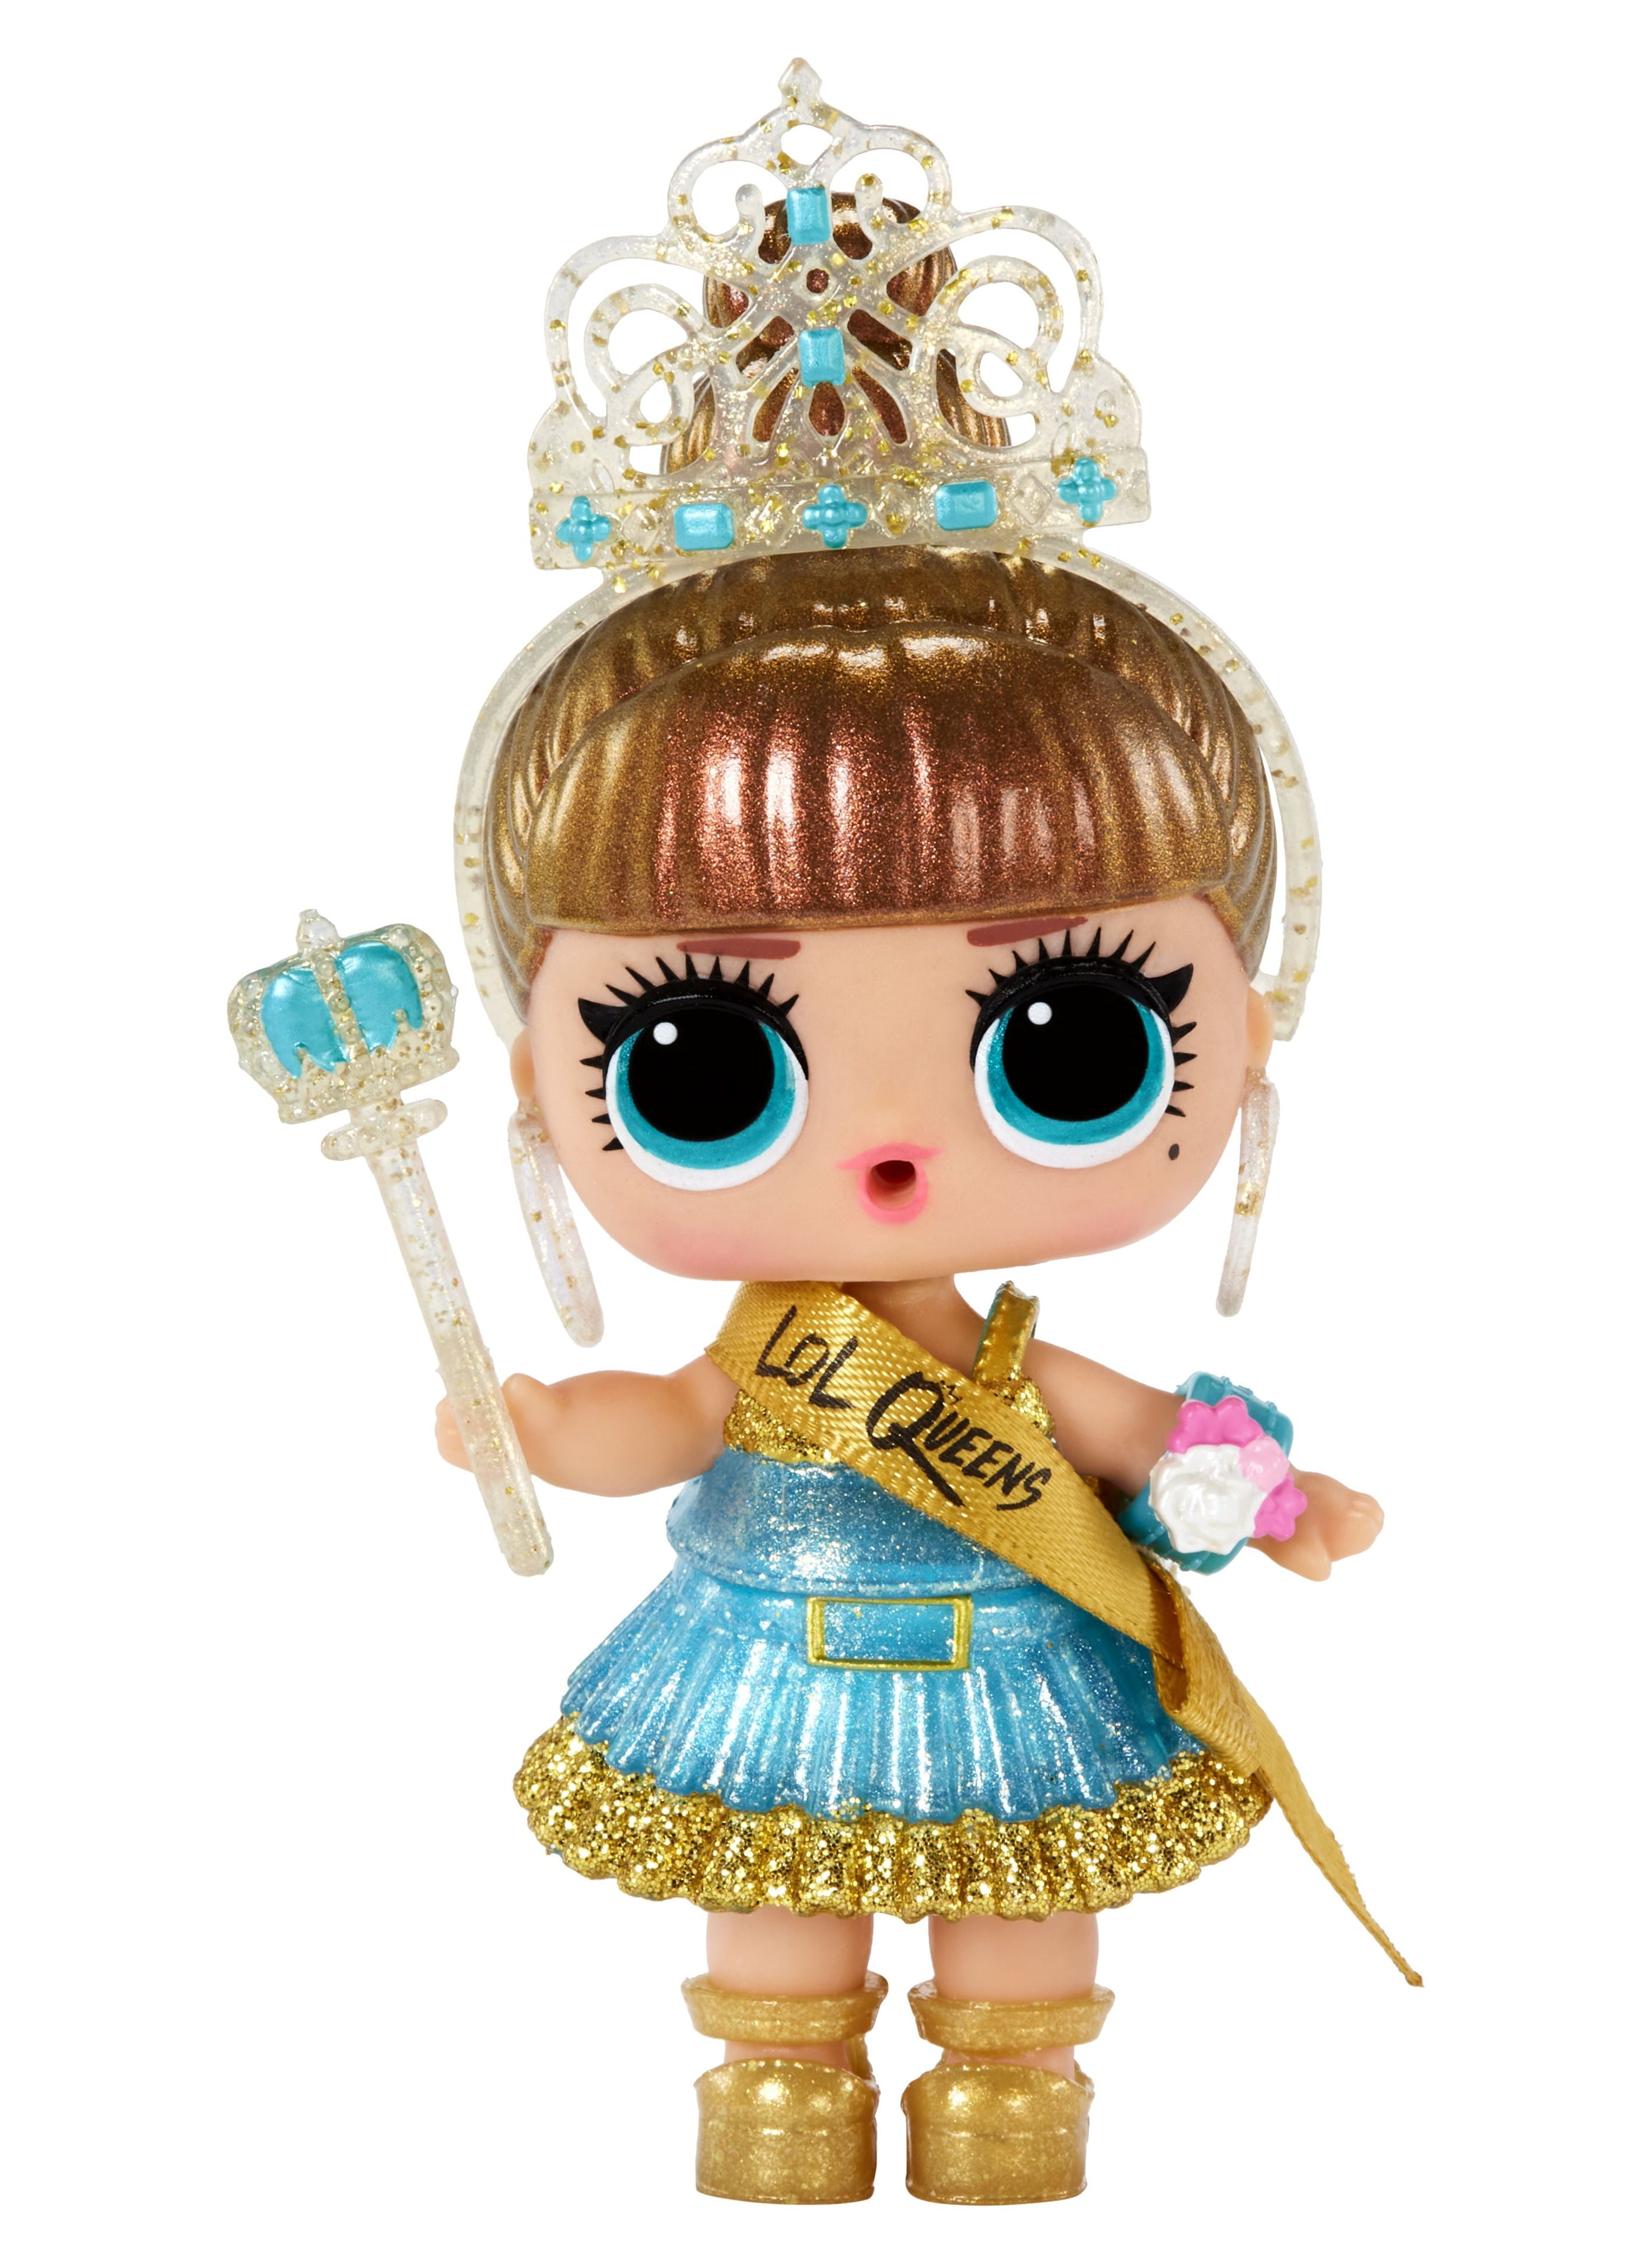  L.O.L. Surprise! 707 Queen Bee Doll with 7 Surprises in Paper  Ball- Collectible w/Water Surprise & Fashion Accessories, Holiday Toy,  Great Gift for Kids Ages 4 5 6+ Years Old Collectors 